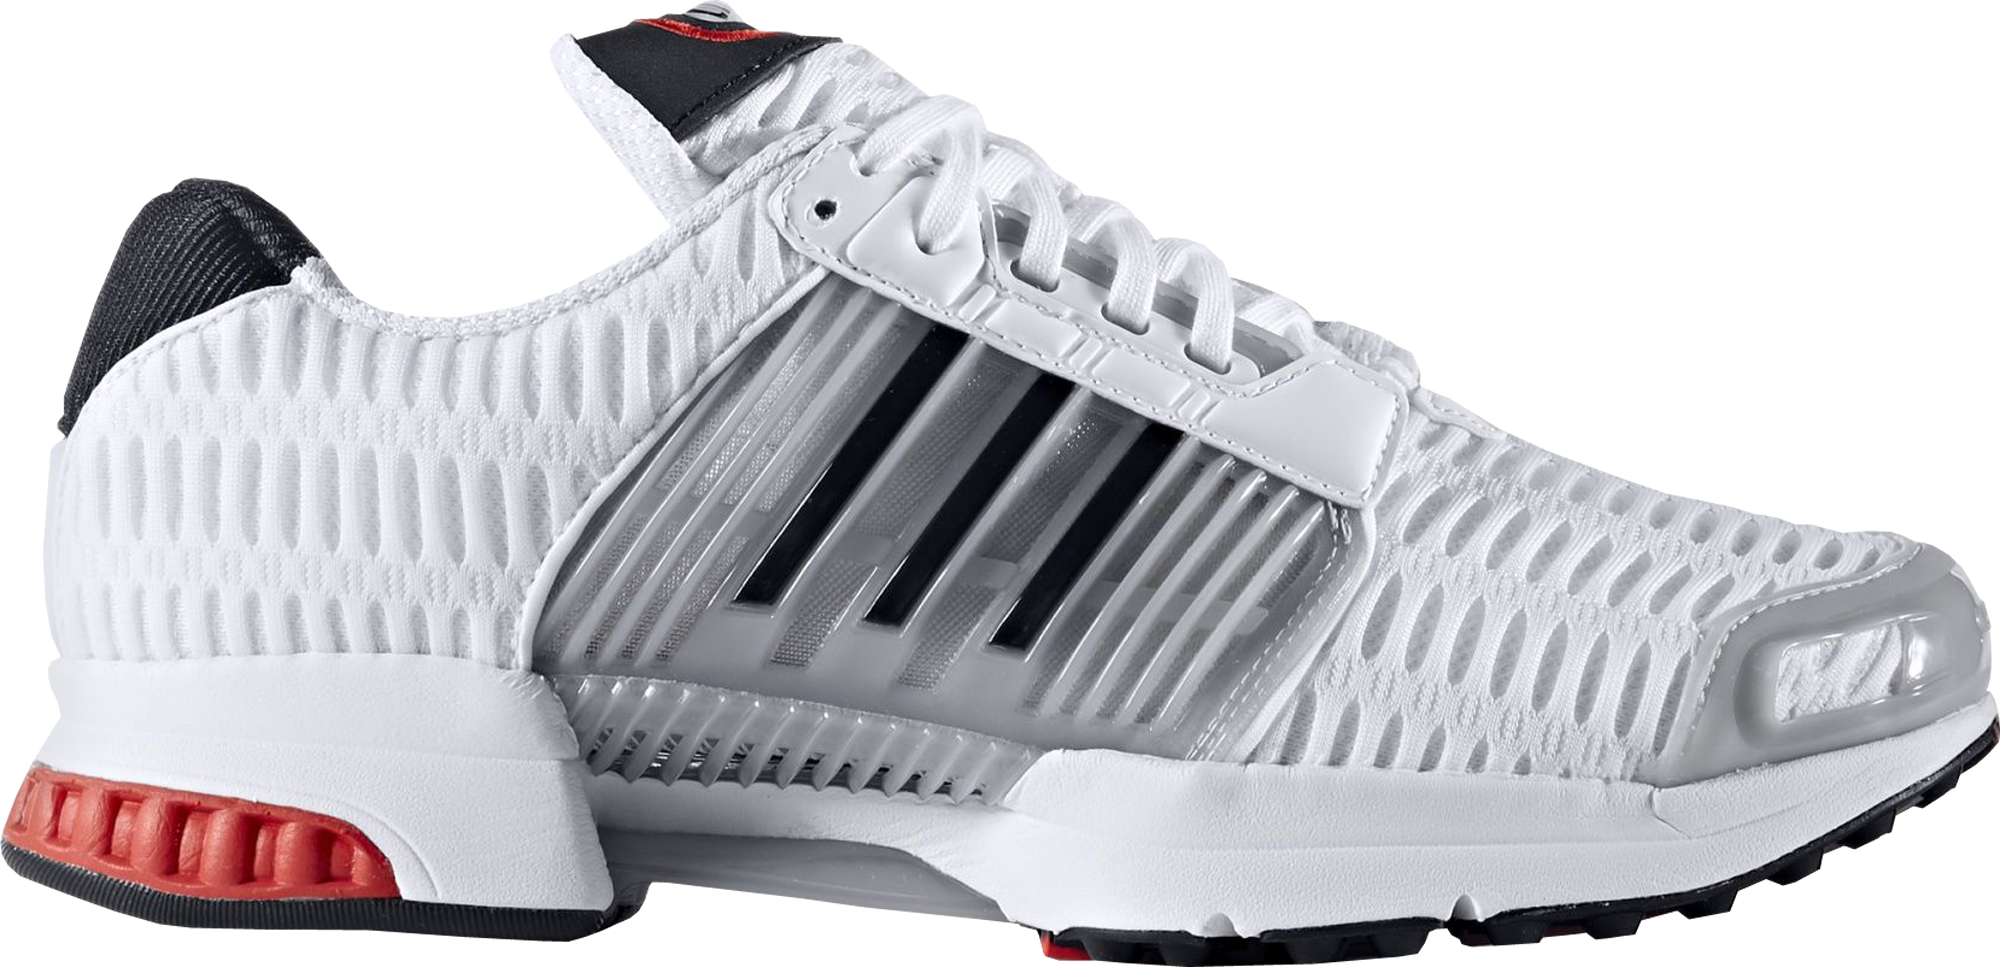 NOT WHAT I THOUGHT.. ADIDAS CLIMACOOL VENTO REVIEW & ON FOOT - YouTube